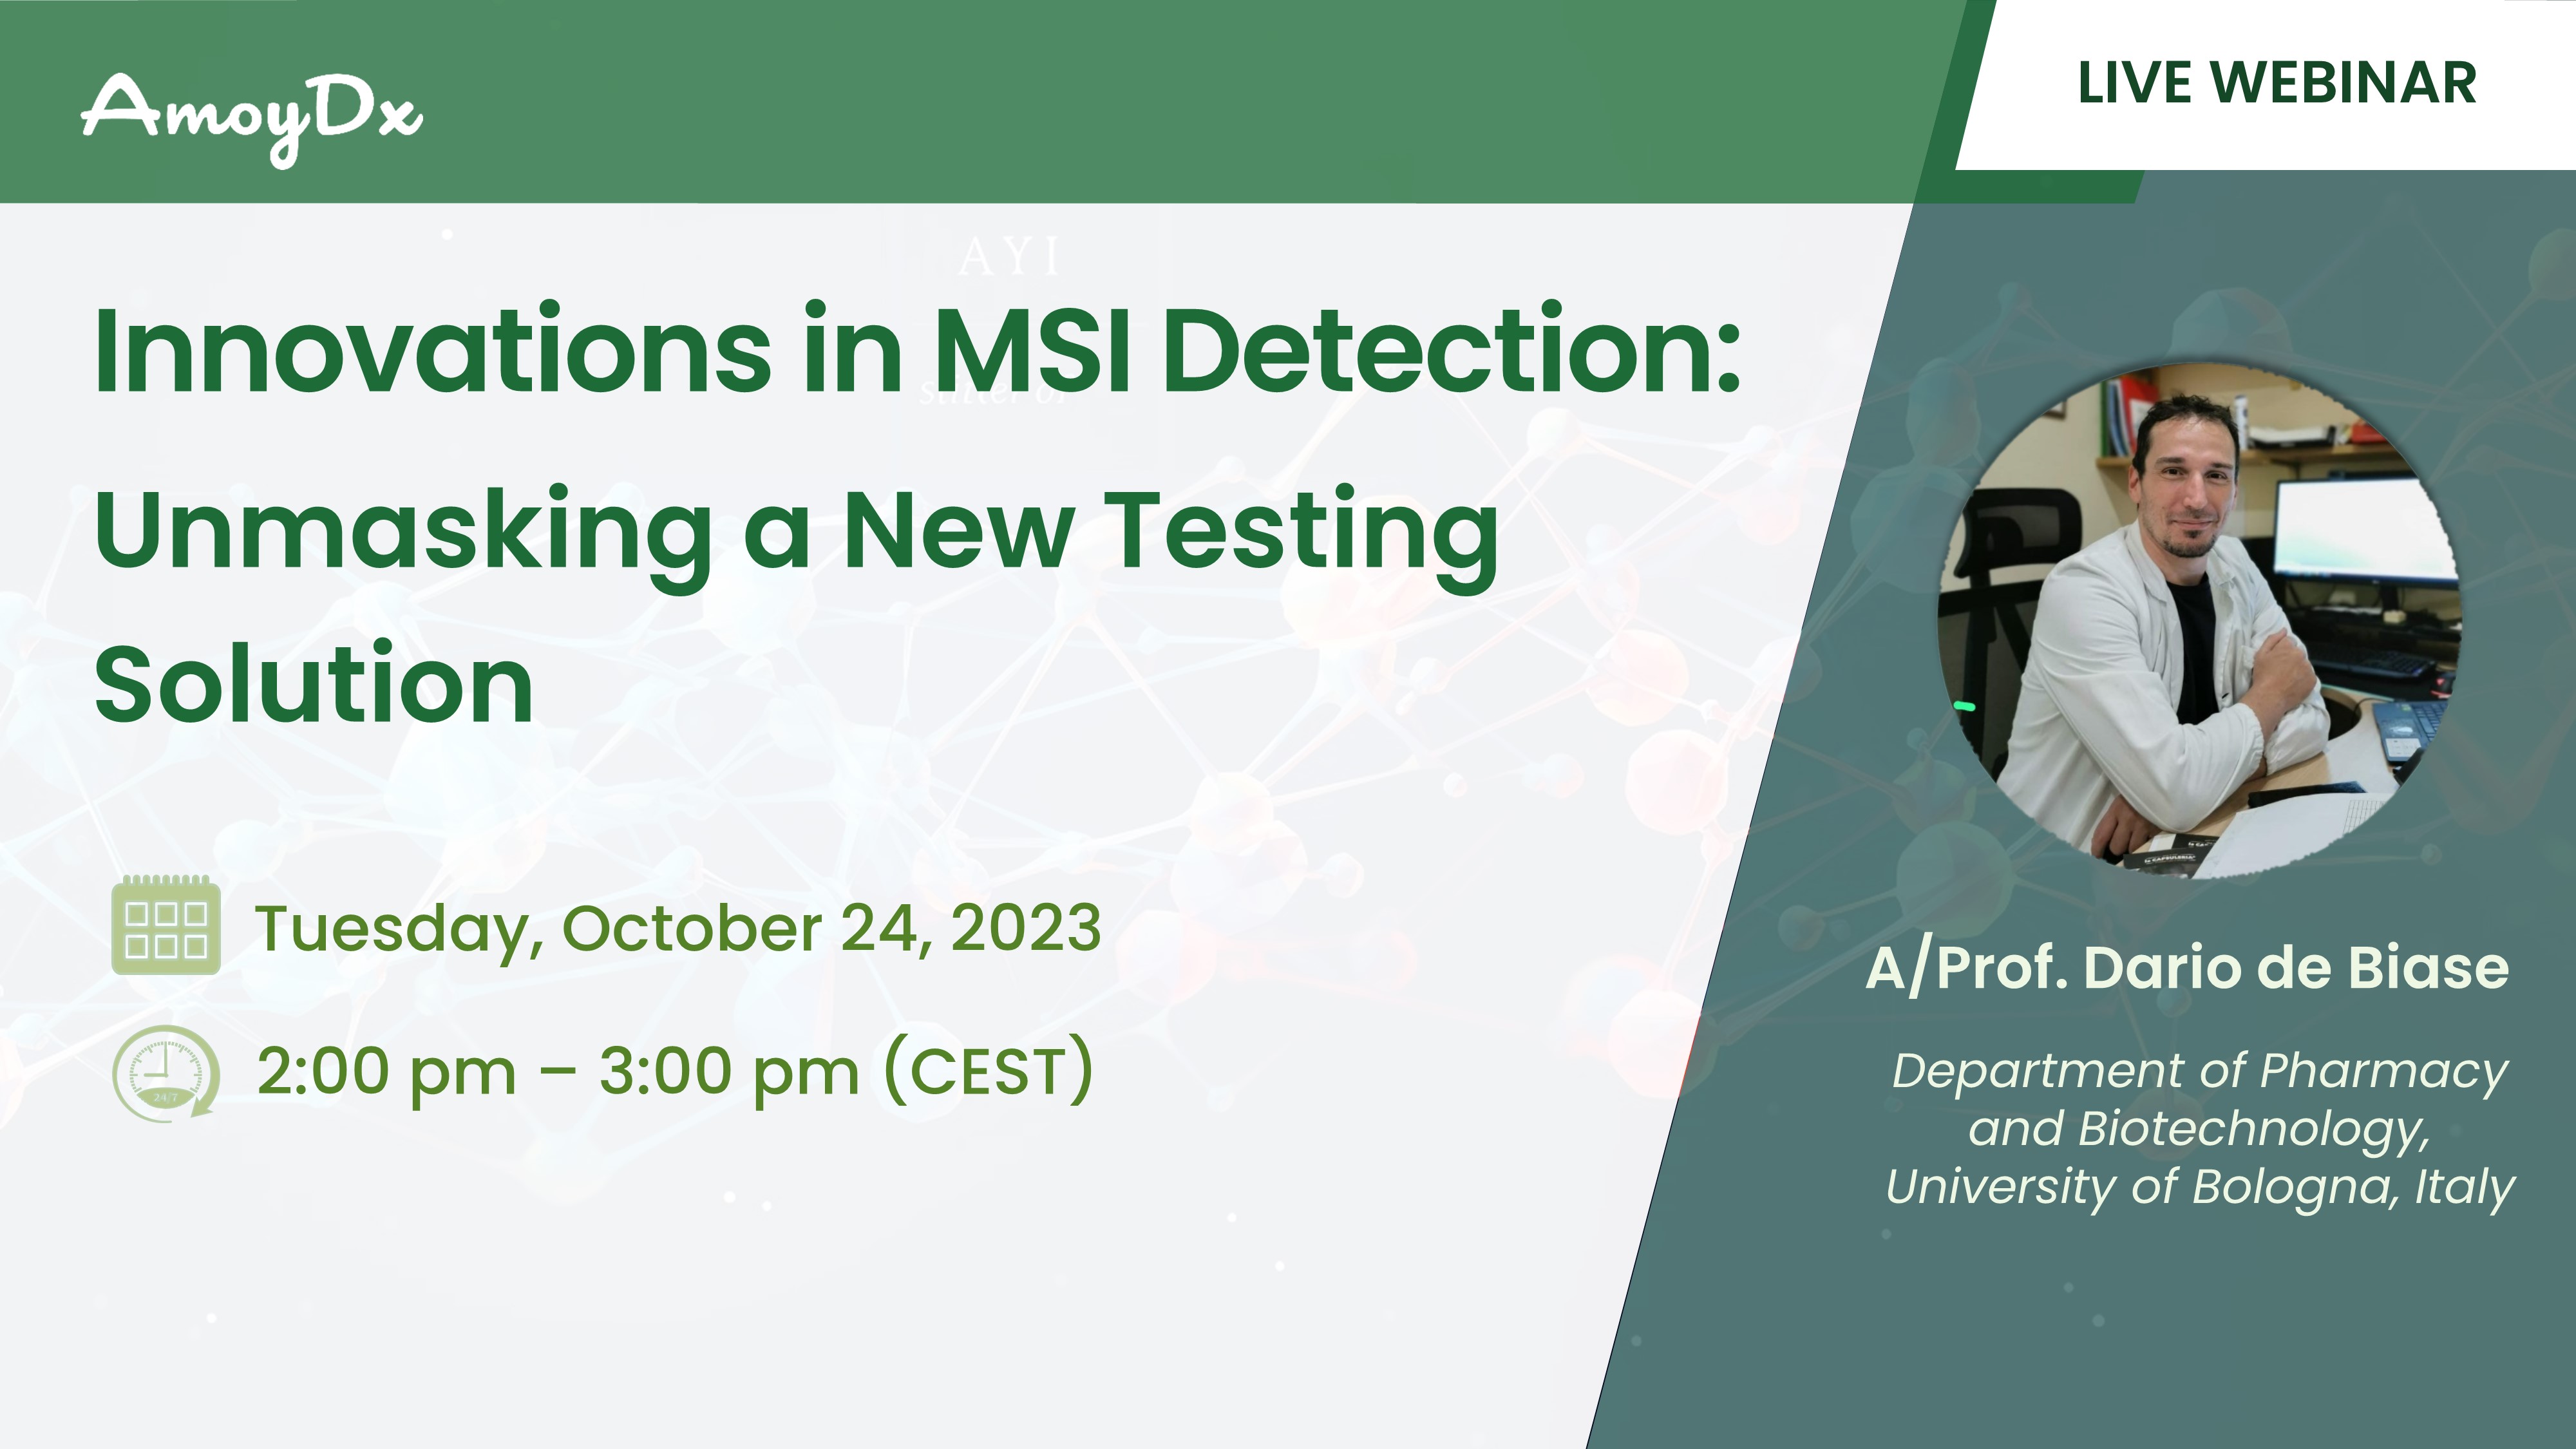 Innovations in MSI Detection: Unmasking a New Testing Solution